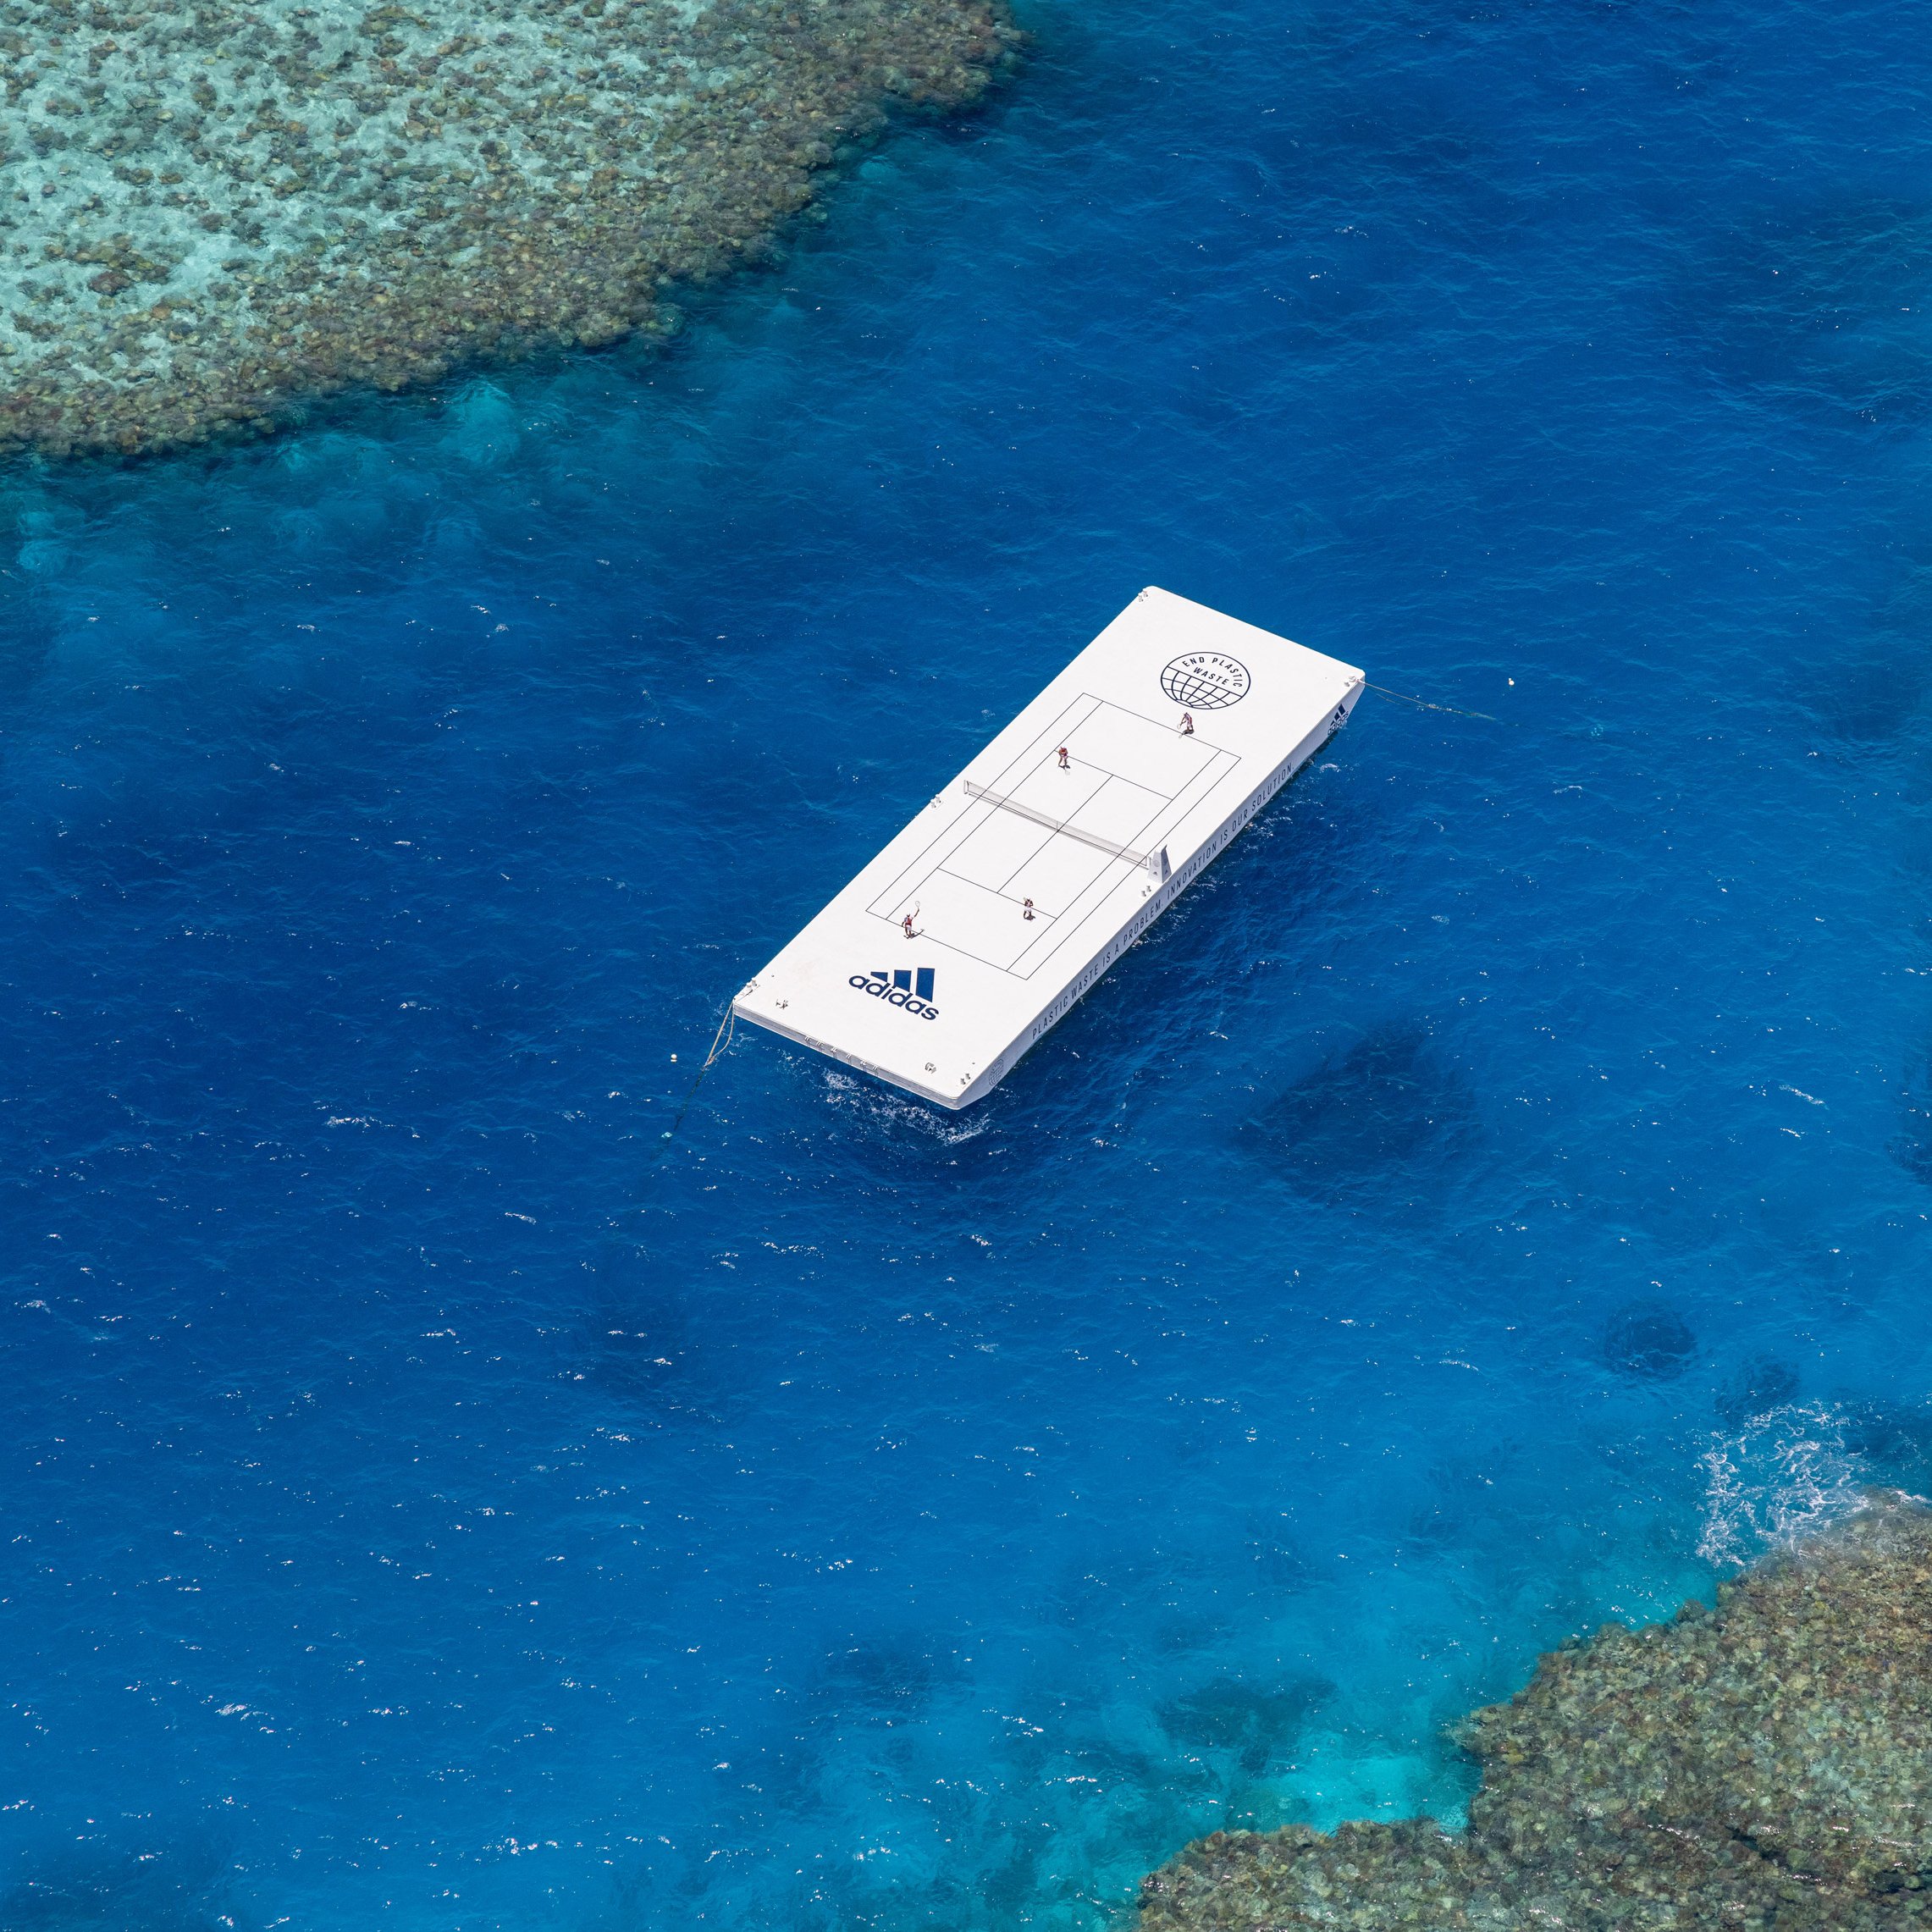 Adidas launches floating tennis court in Barrier Reef